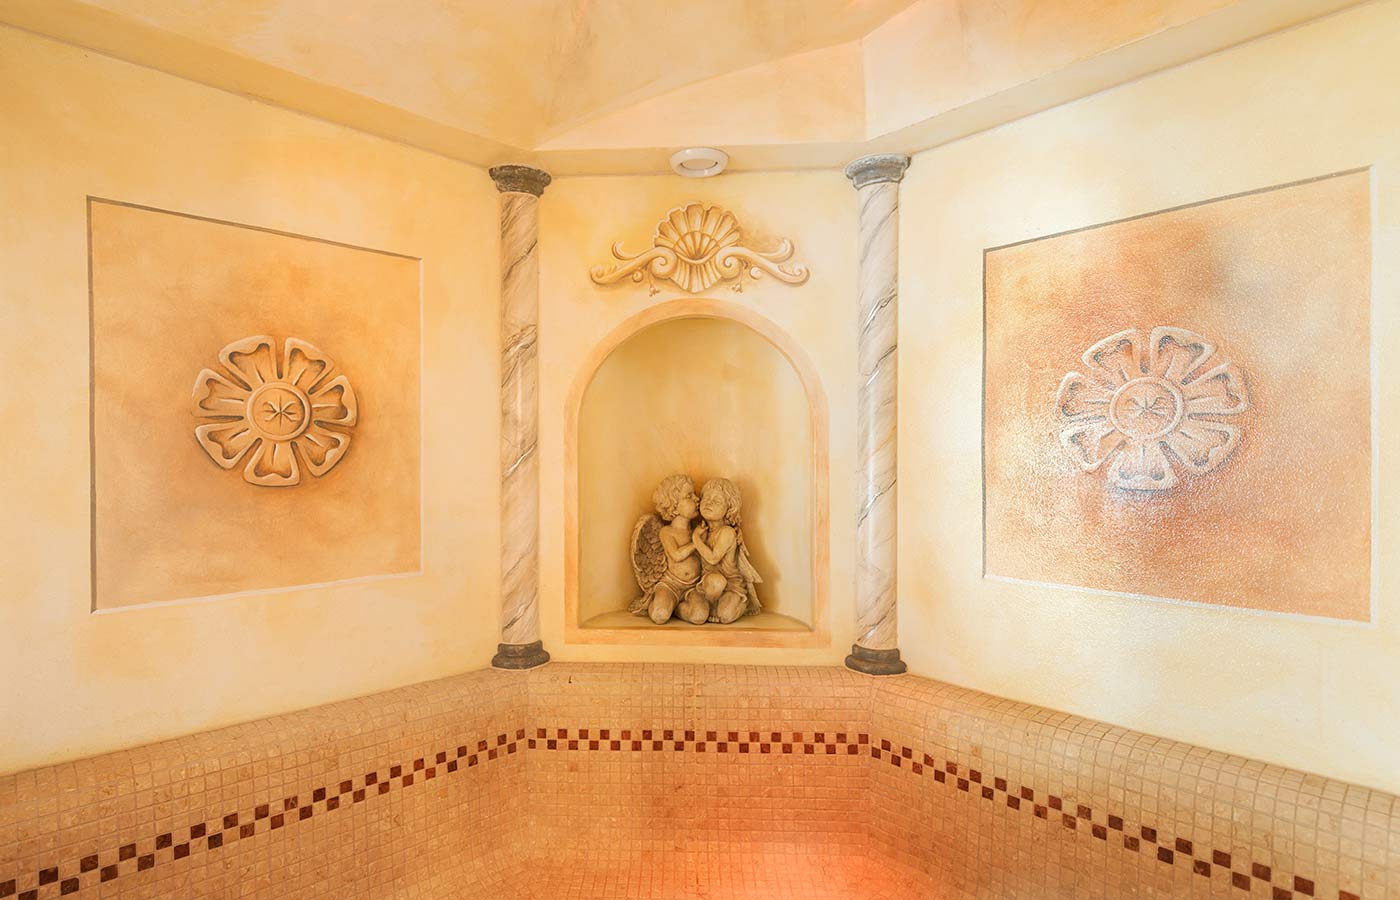 Mosaics and frescoes on the walls of the hammam in the spa at Hotel Waldheim